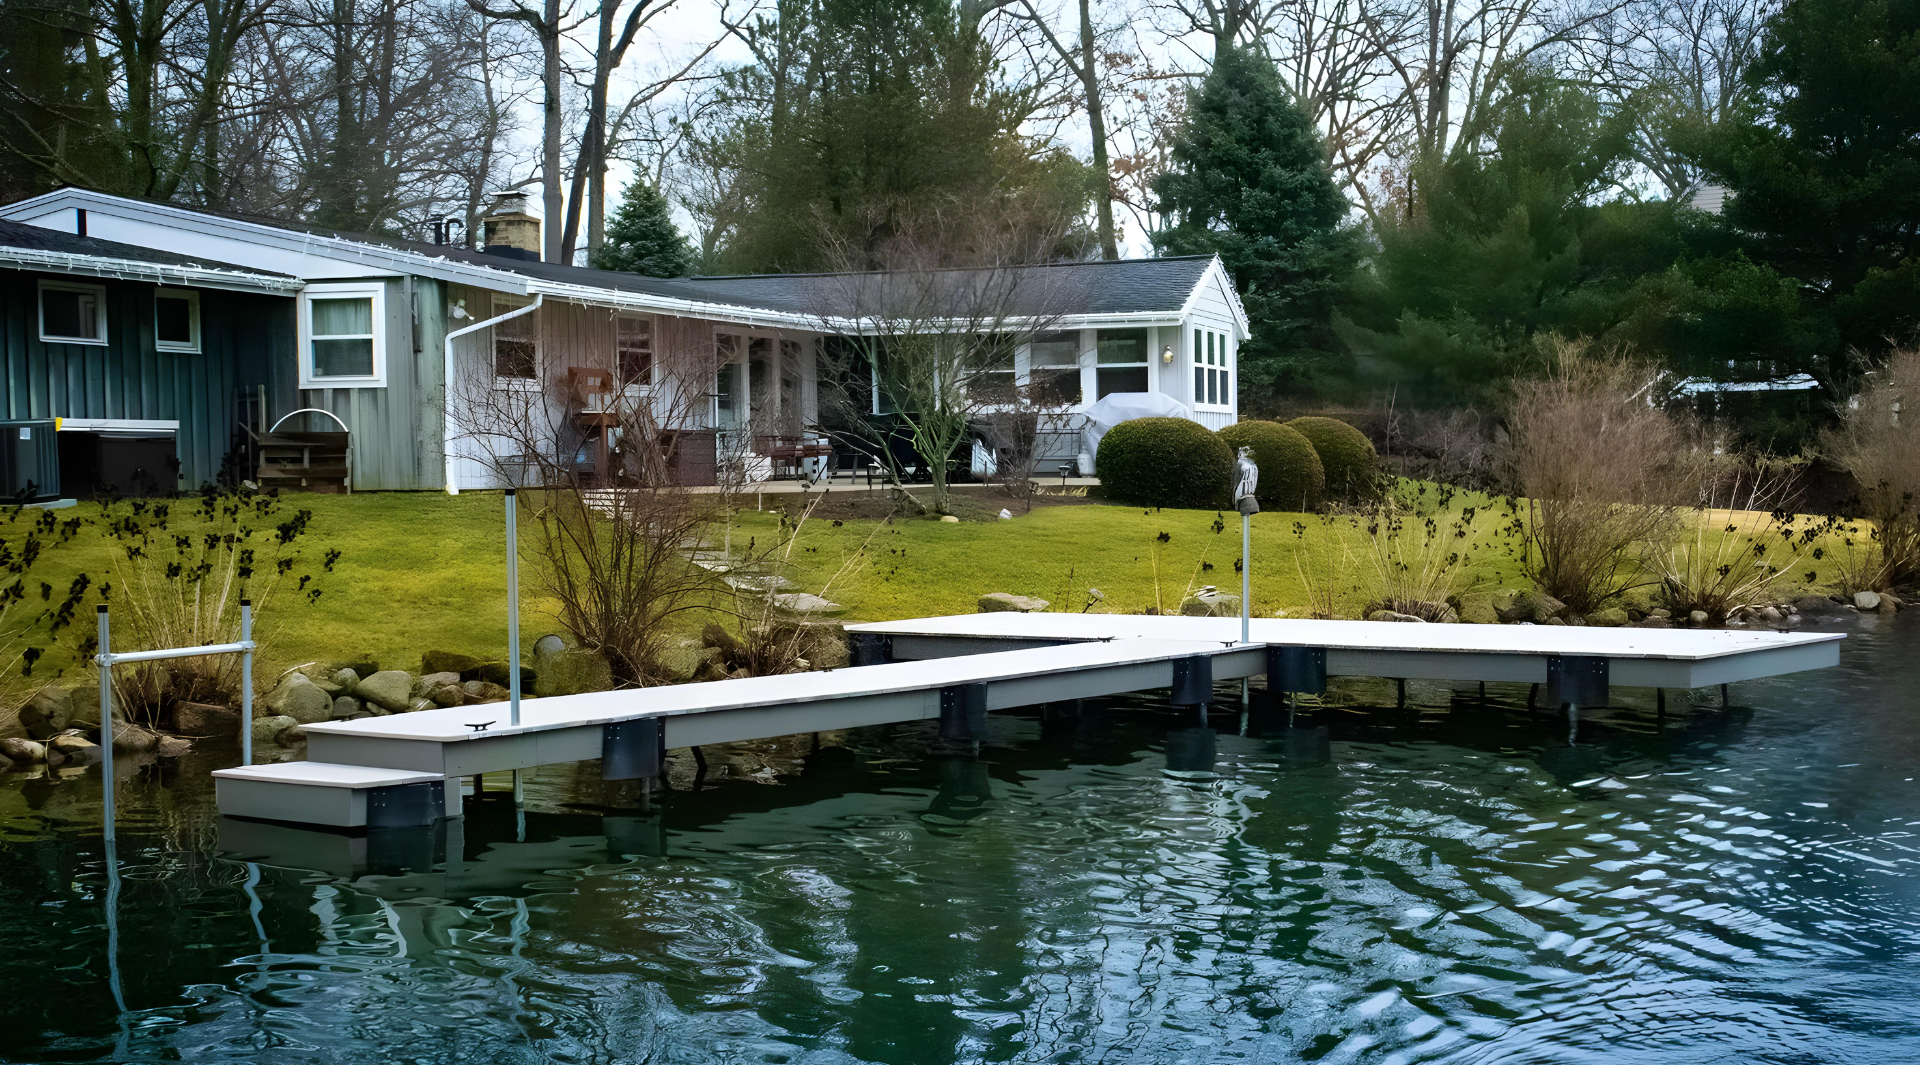 A house is sitting next to a body of water.